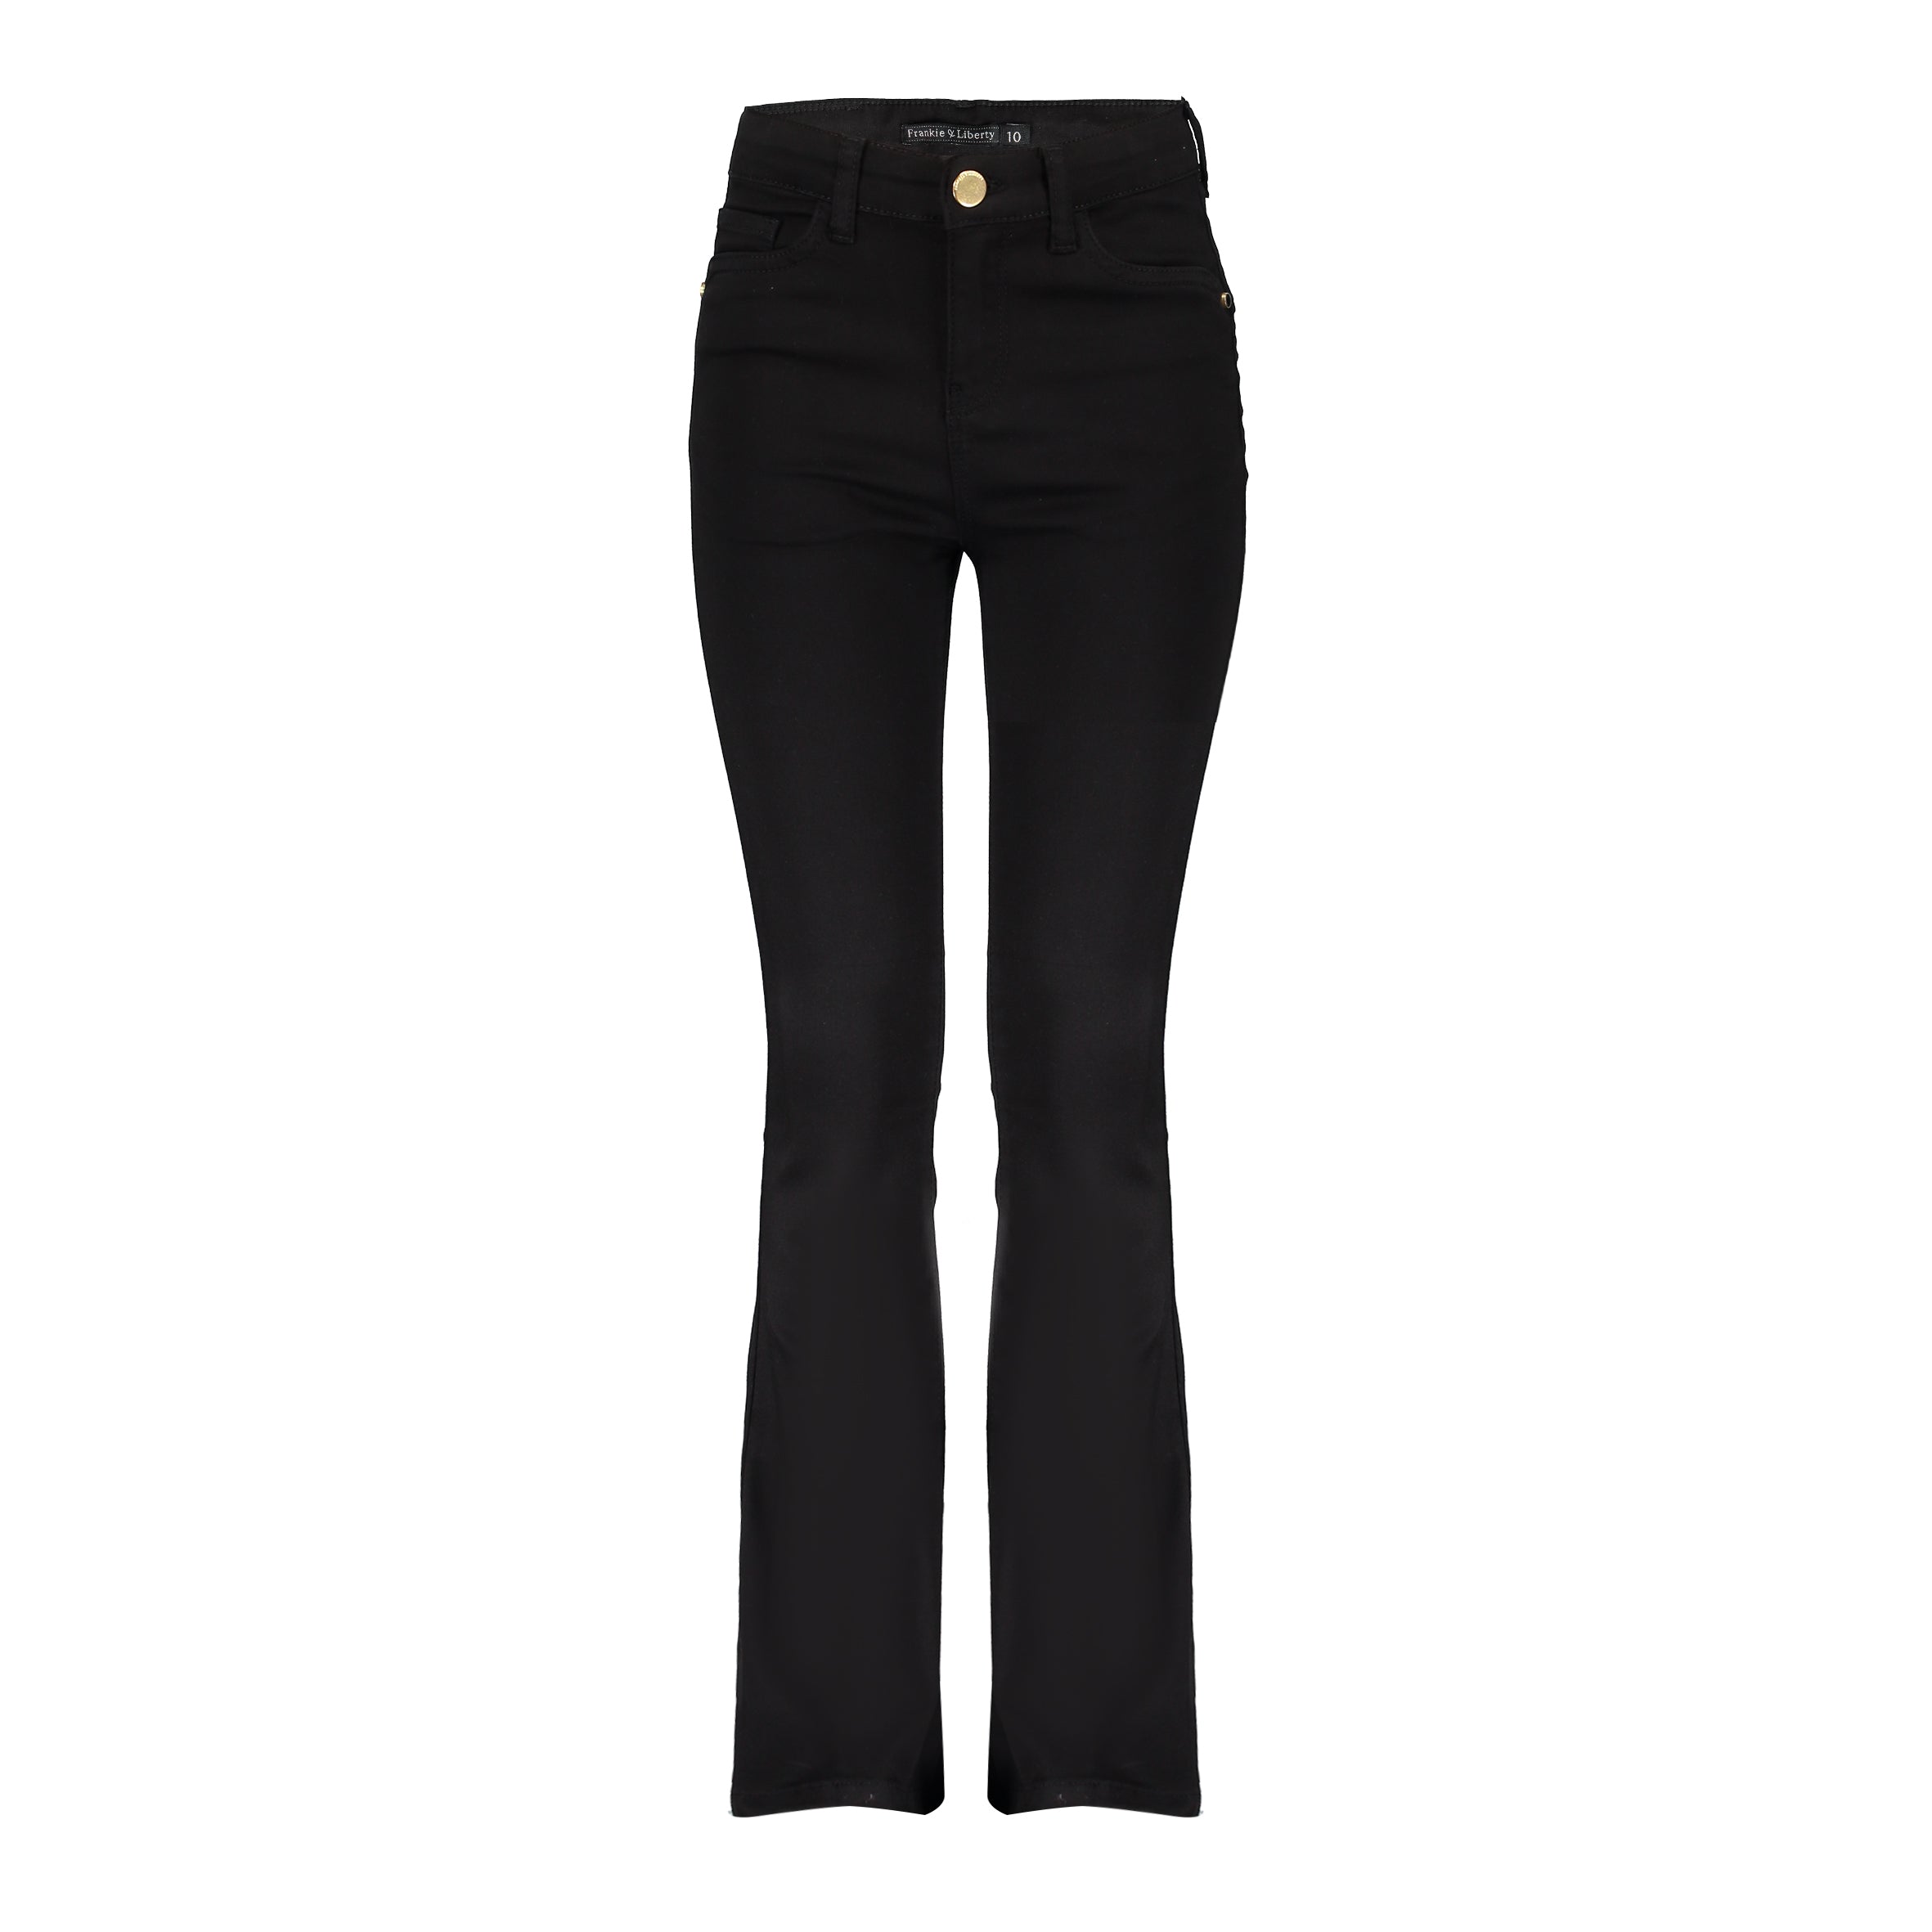 Frankie & Liberty Peggy Flared Pant